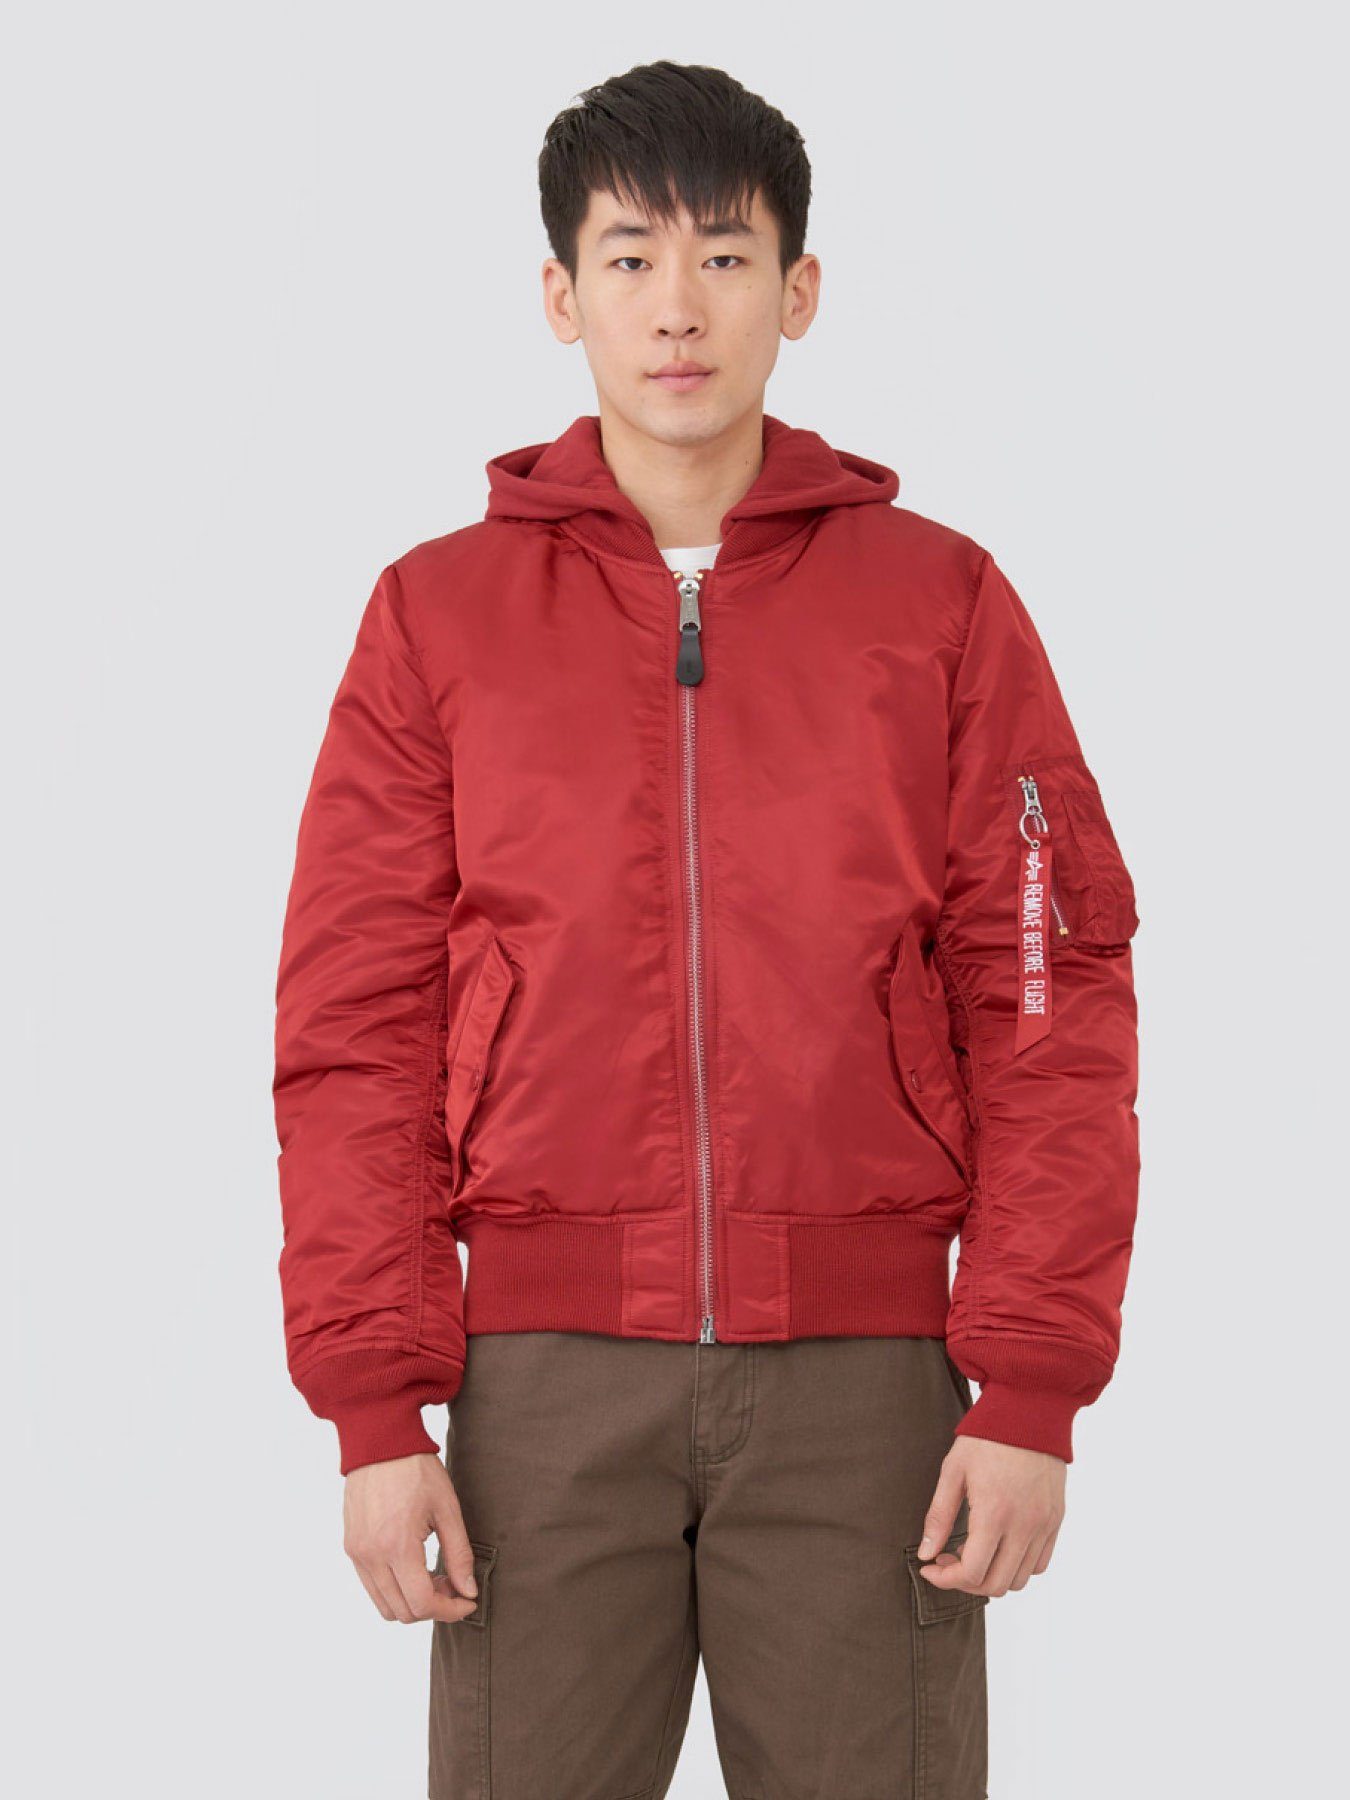 MA-1 NATUS BOMBER JACKET OUTERWEAR Alpha Industries COMM. RED/VNTG OLIVE LINING 2XL 